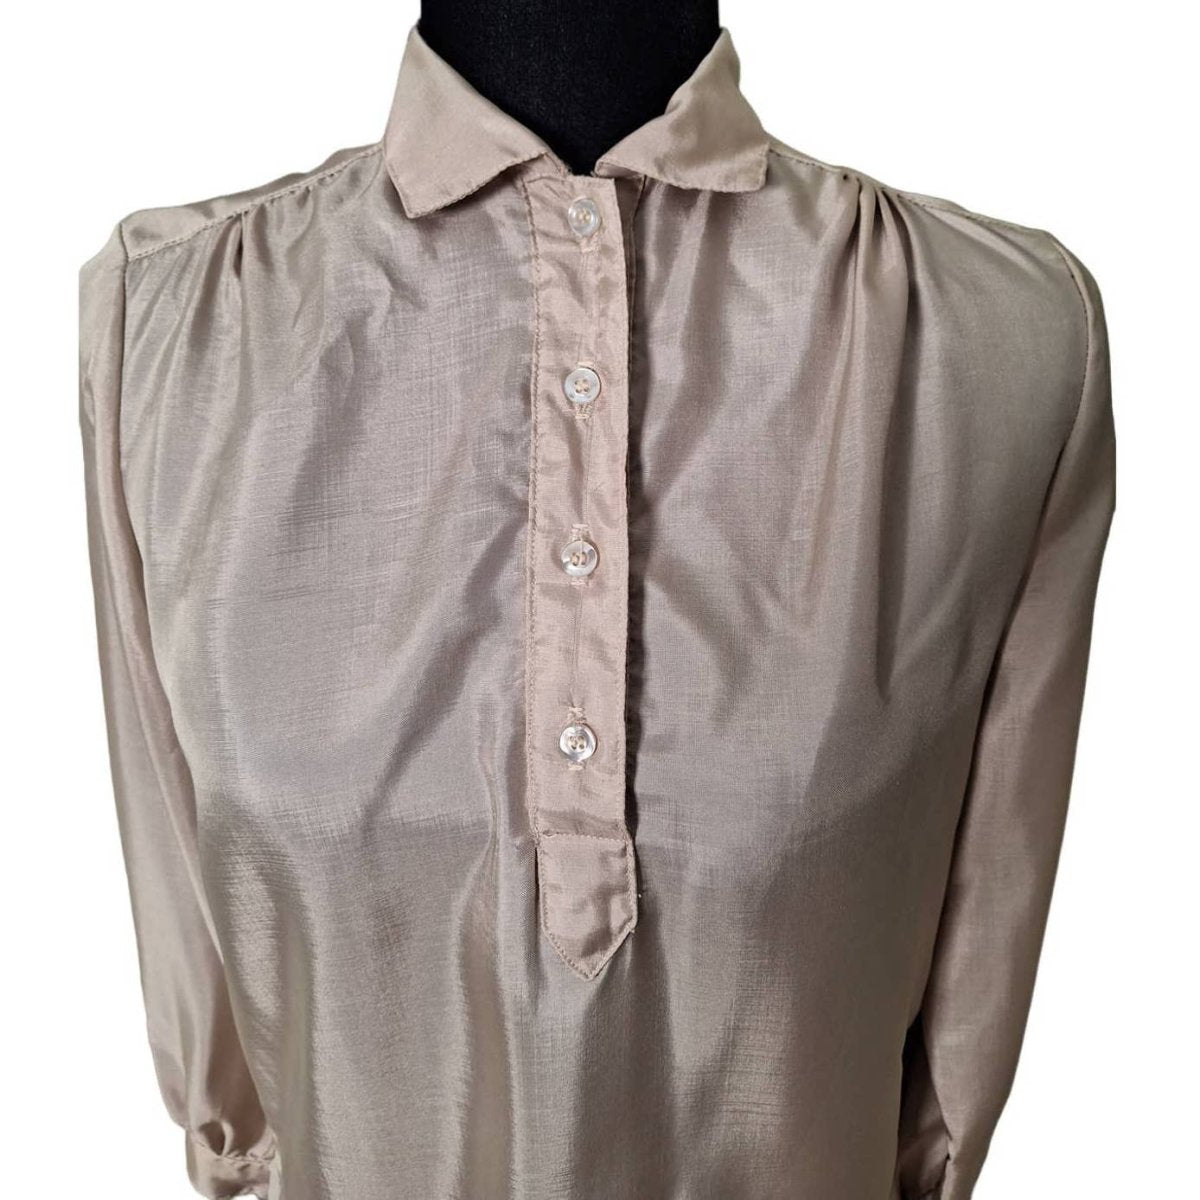 70s/80s Muted Gold Blouse Junior's Size 7/8 Women XS/S - themallvintage The Mall Vintage